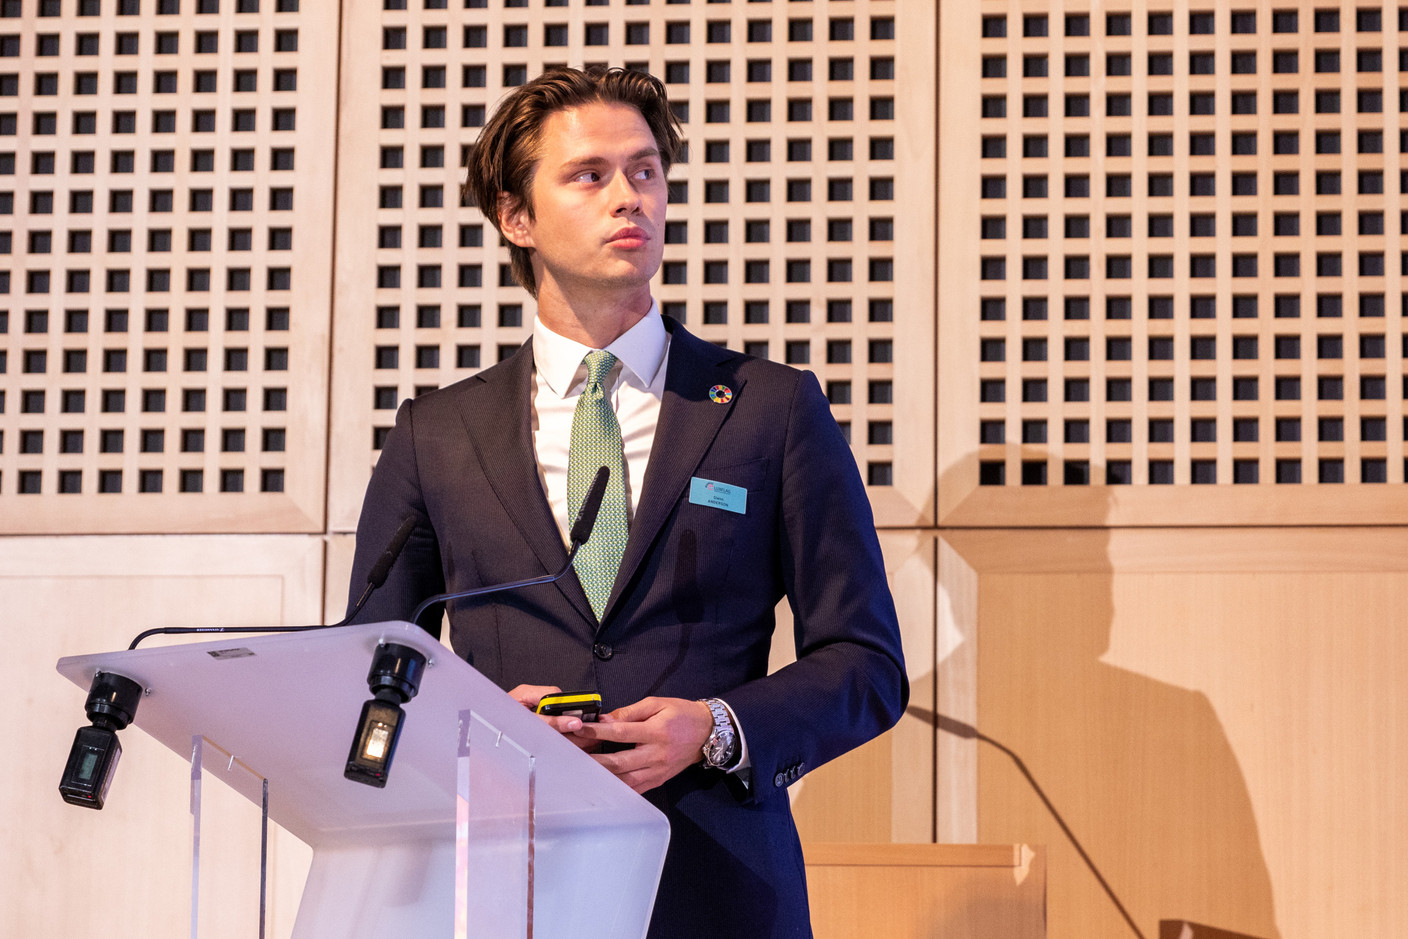 Glenn Anderson of Fidelity International is seen speaking at Luxflag Sustainable Investment Week 2022, 17 October 2022. Photo: Romain Gamba/Maison Moderne